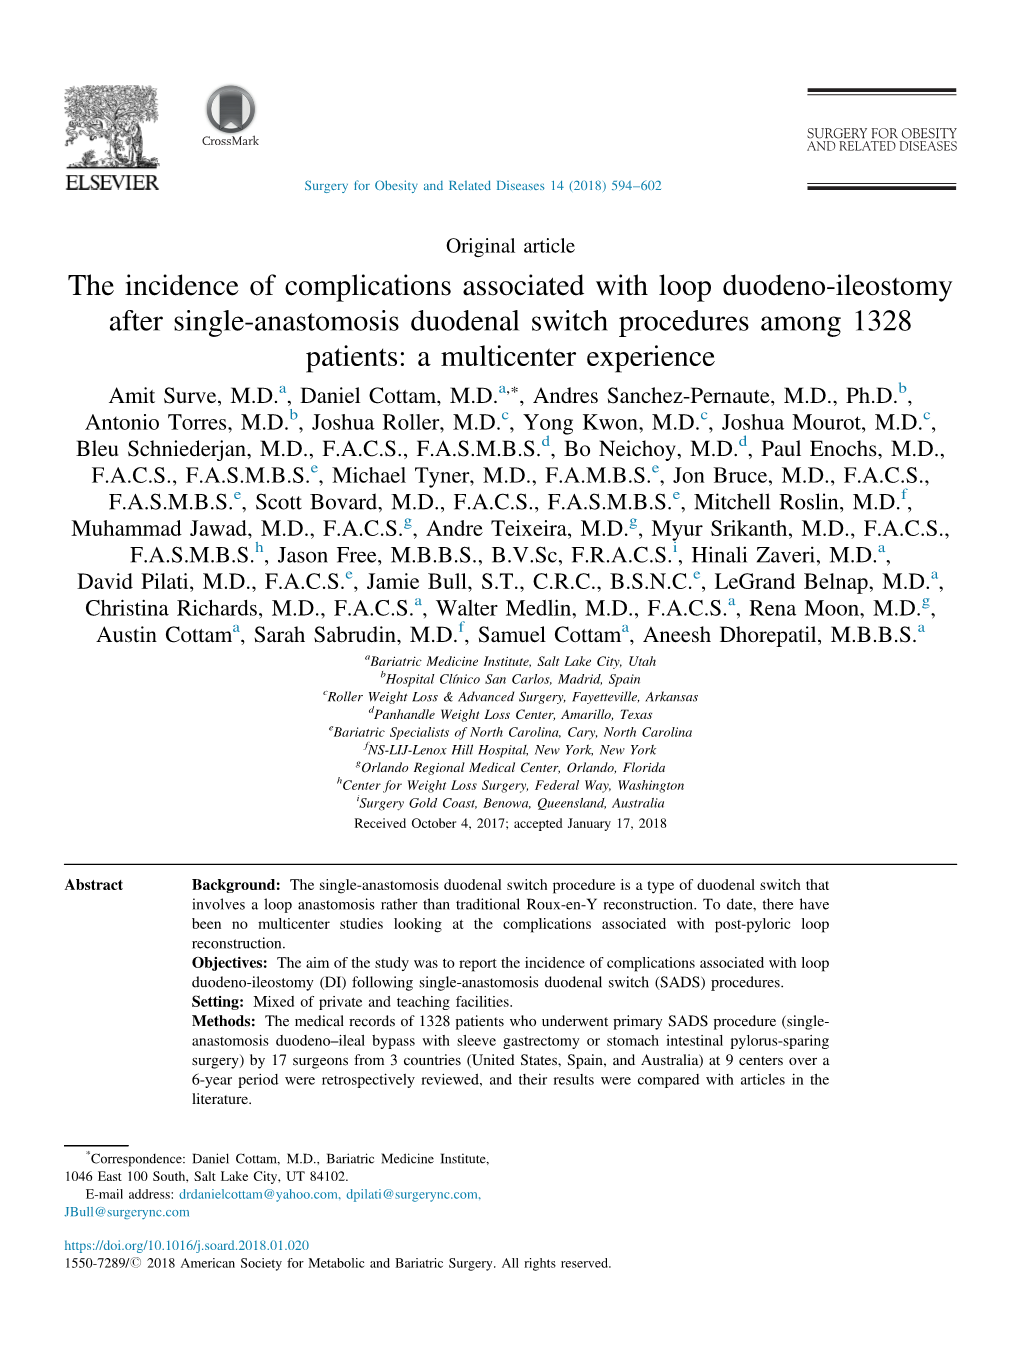 The Incidence of Complications Associated with Loop Duodeno